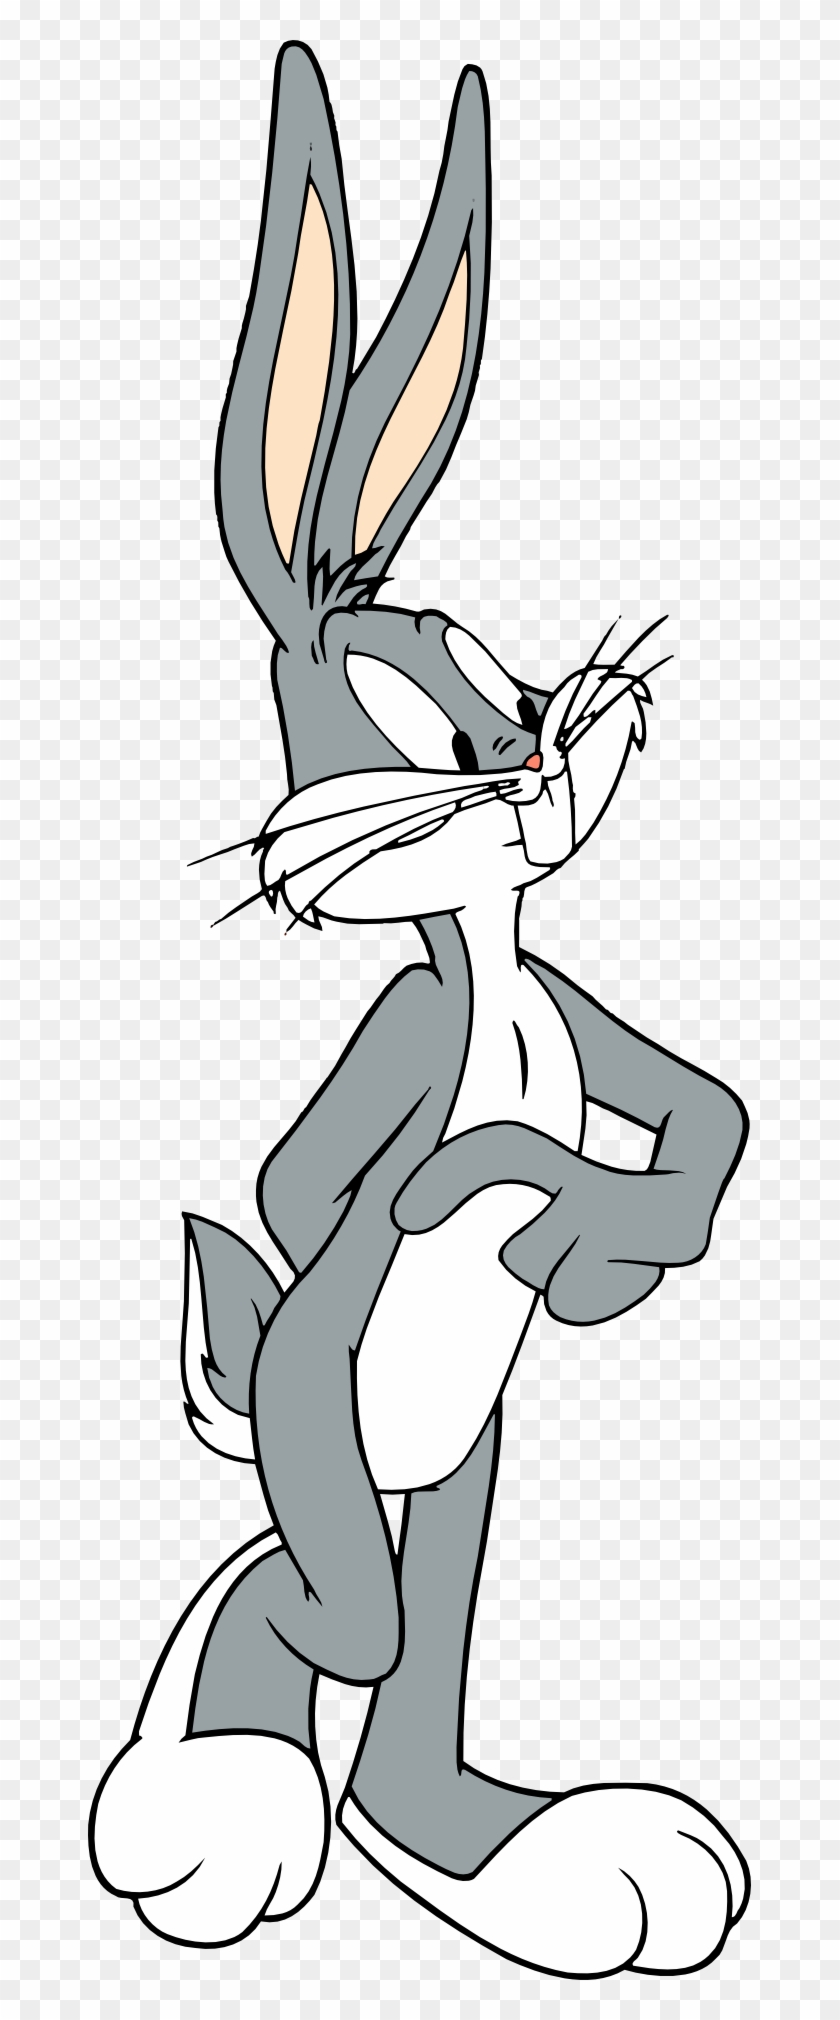 Bugs Bunny Begins To Flirt While Not Wearing His Gloves - Memes De Cuando Me Muera Clipart #855634